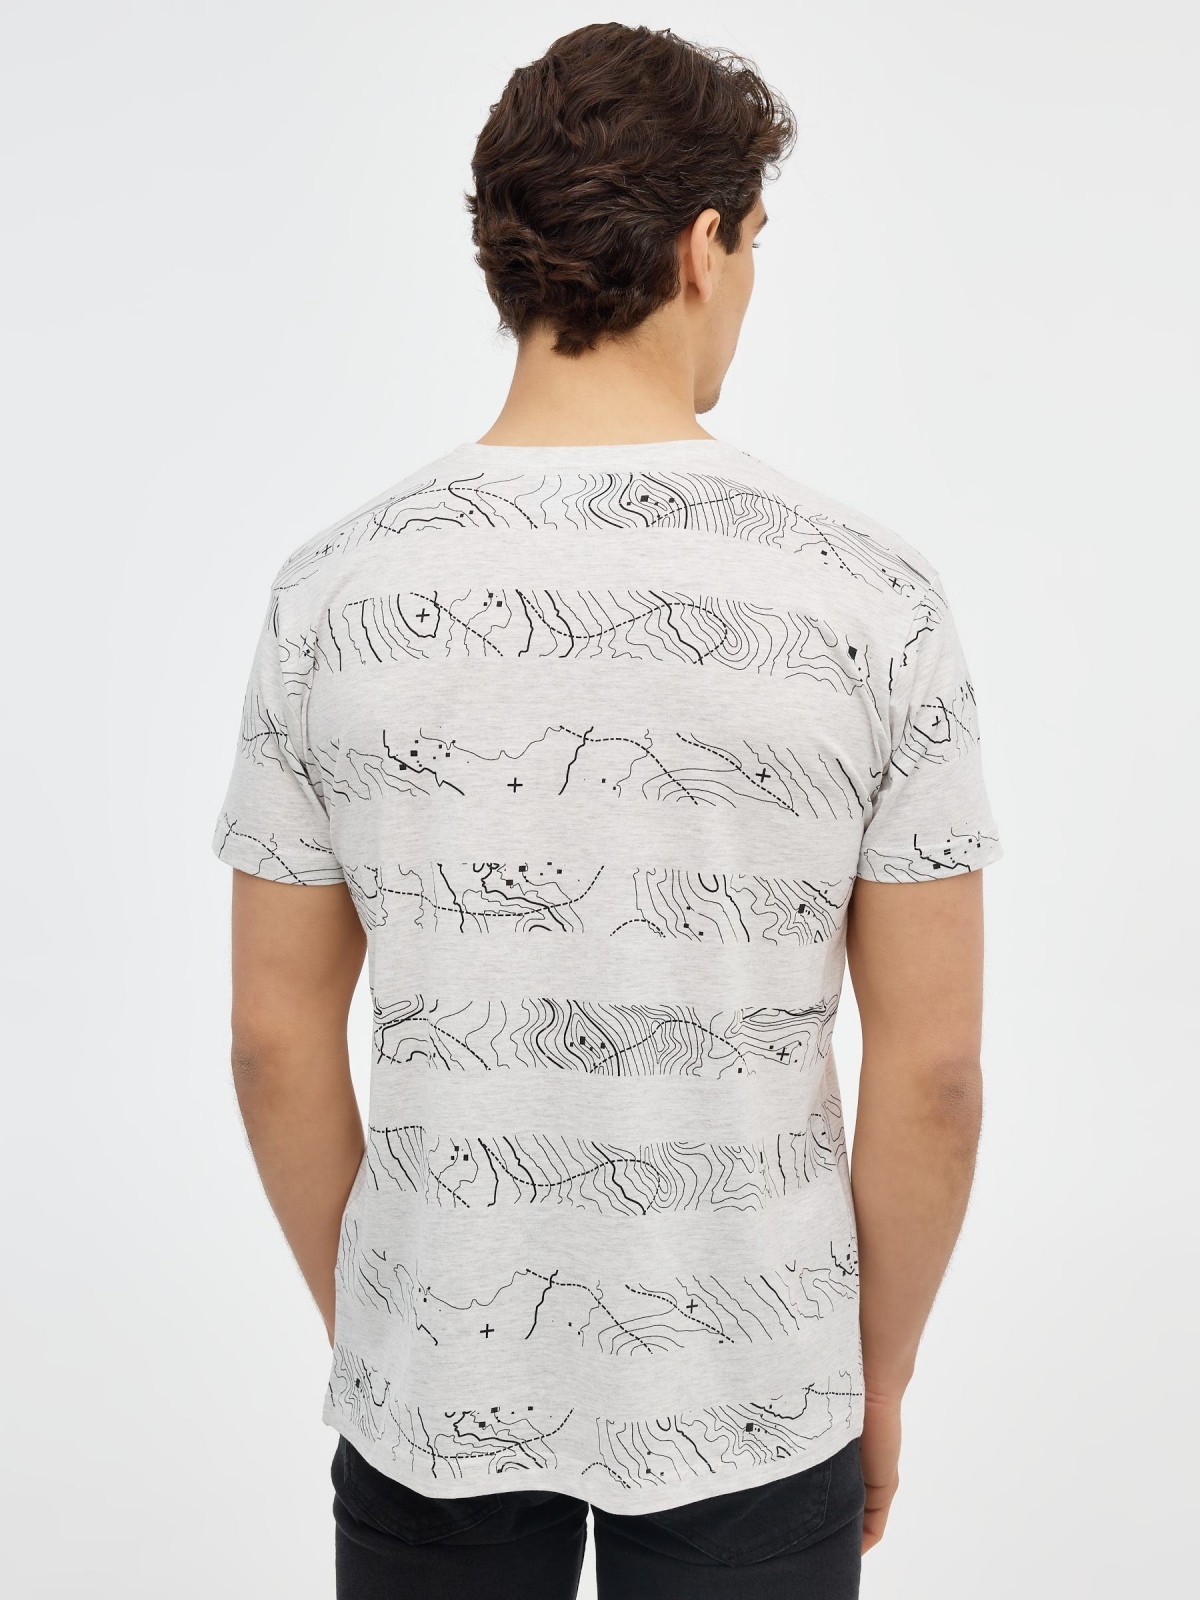 Topographic print T-shirt grey middle back view